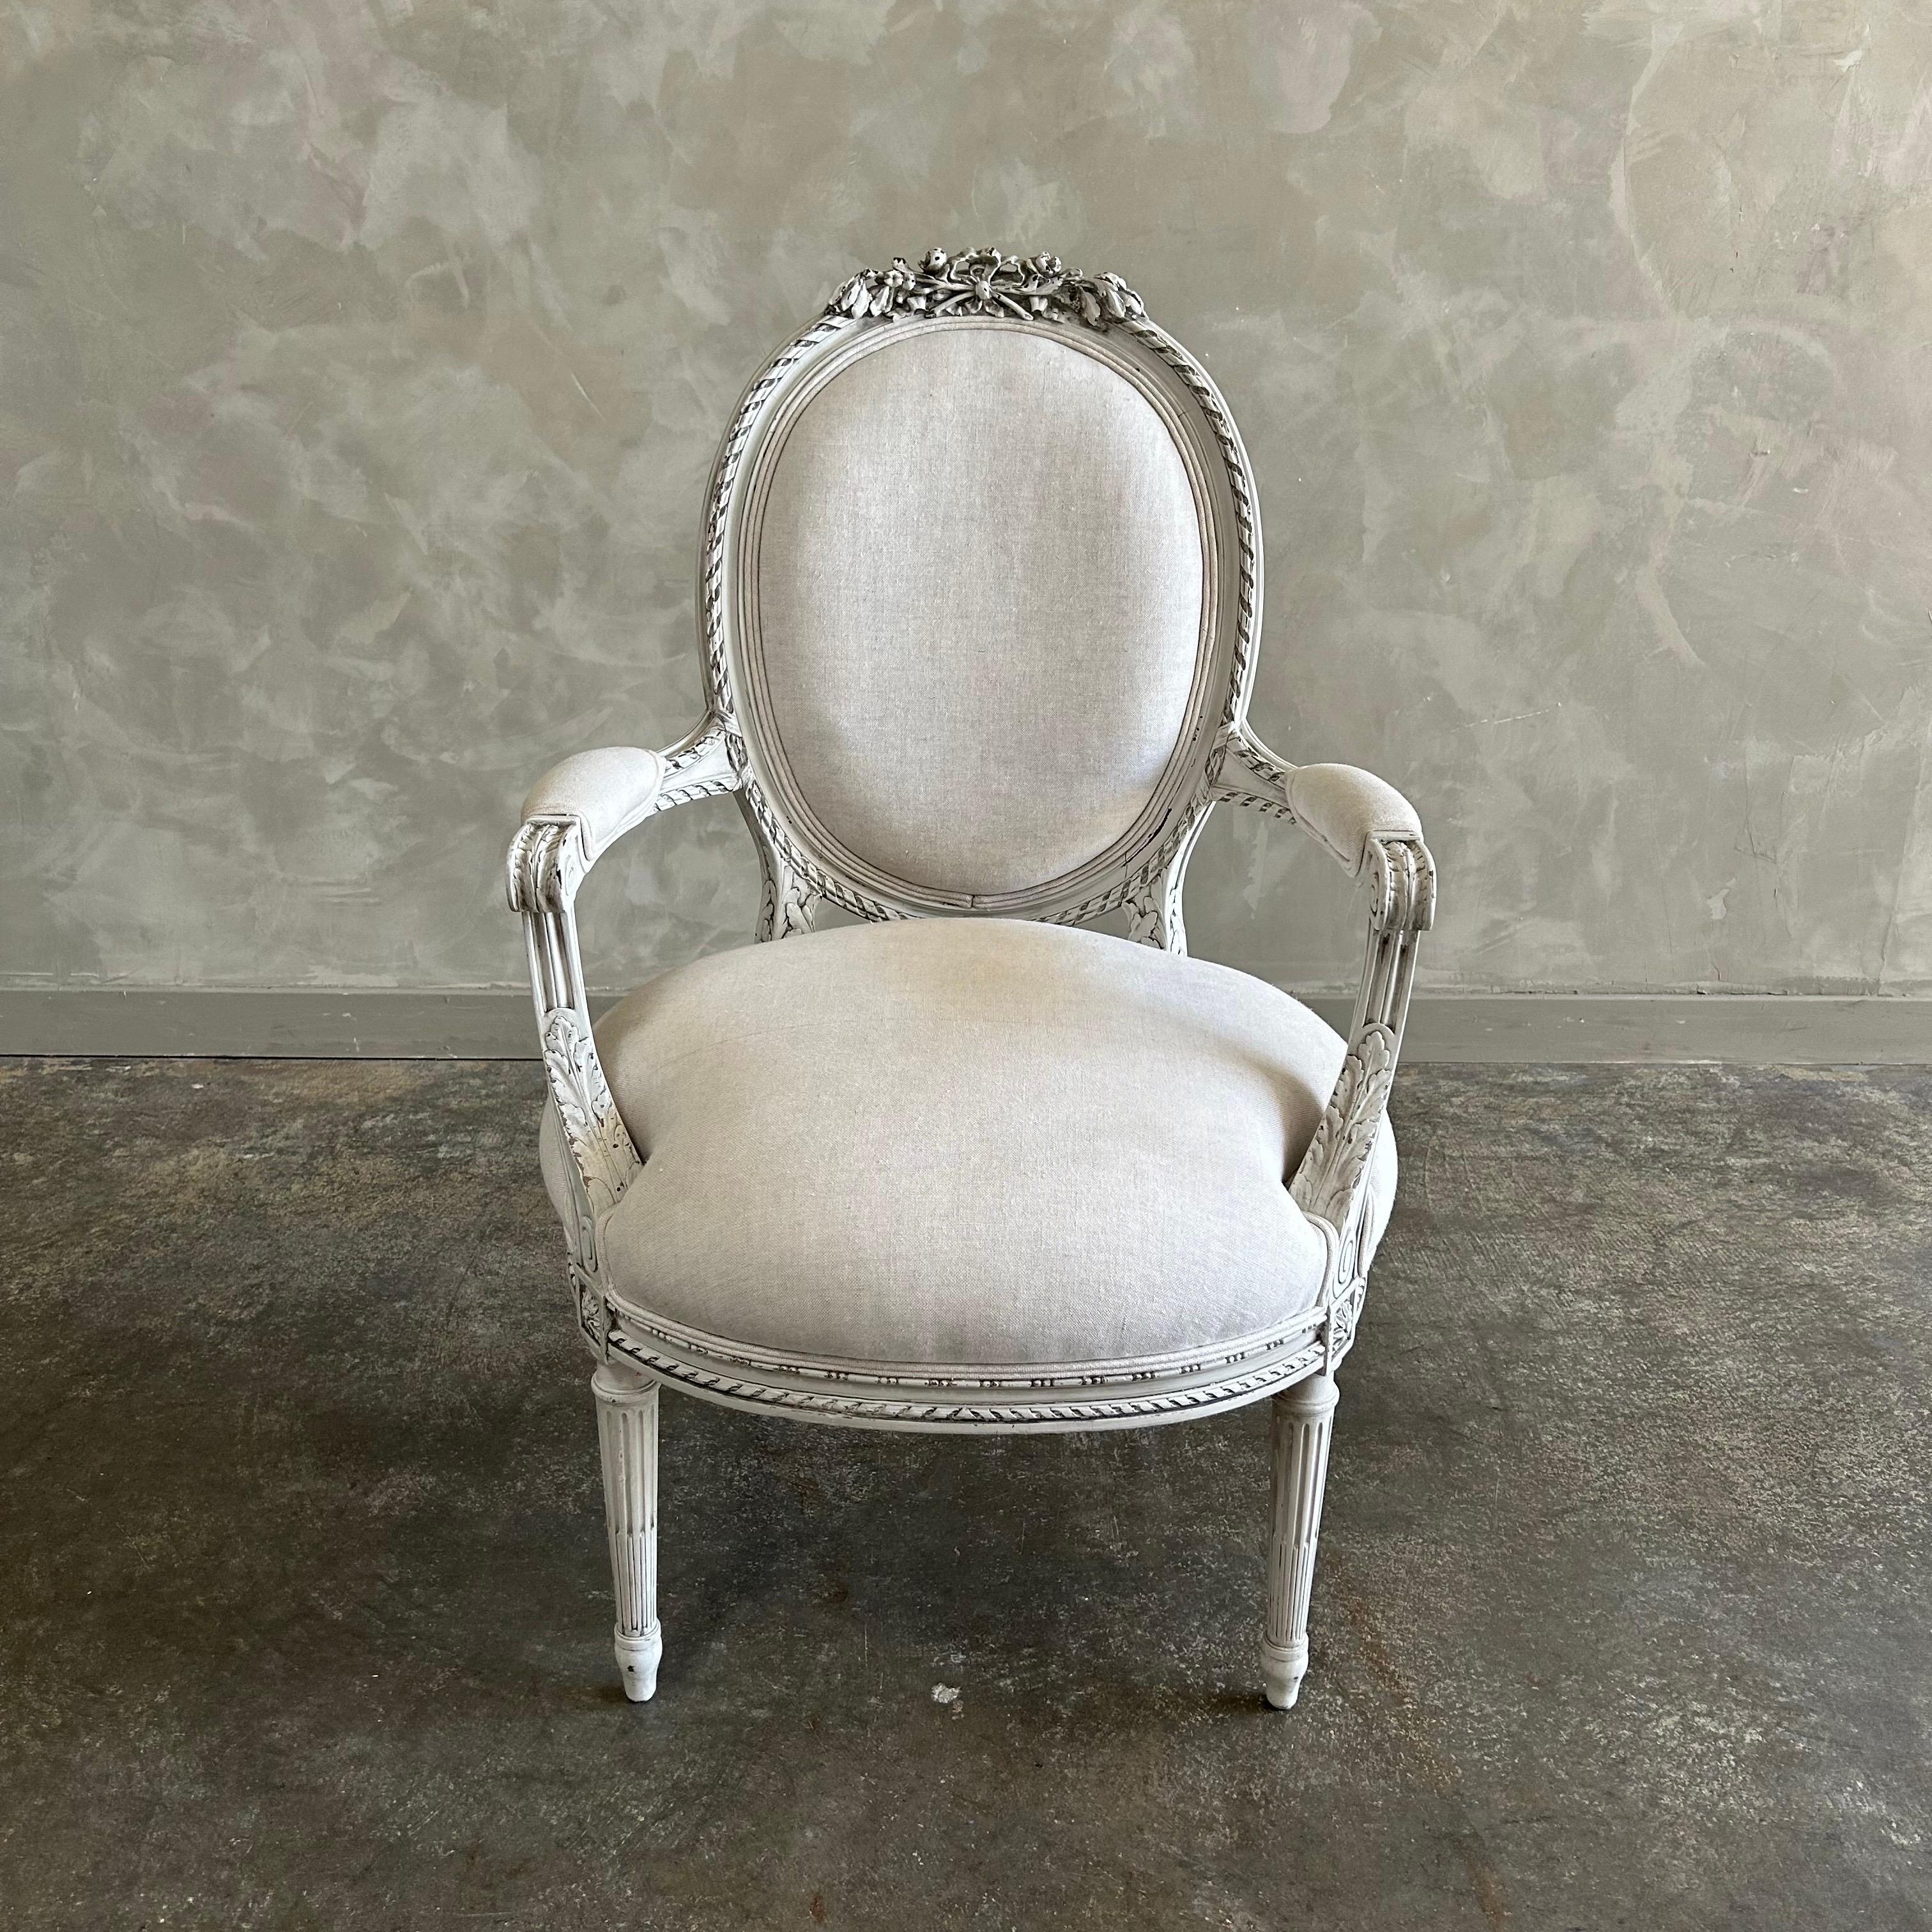 Antique French Louis XVI Style chair. painted in a french oyster white finish with subtle distress edges, finished with an antique patina. Upholstered seat and back in a luxurious natural linen, solid and sturdy ready for everyday use.